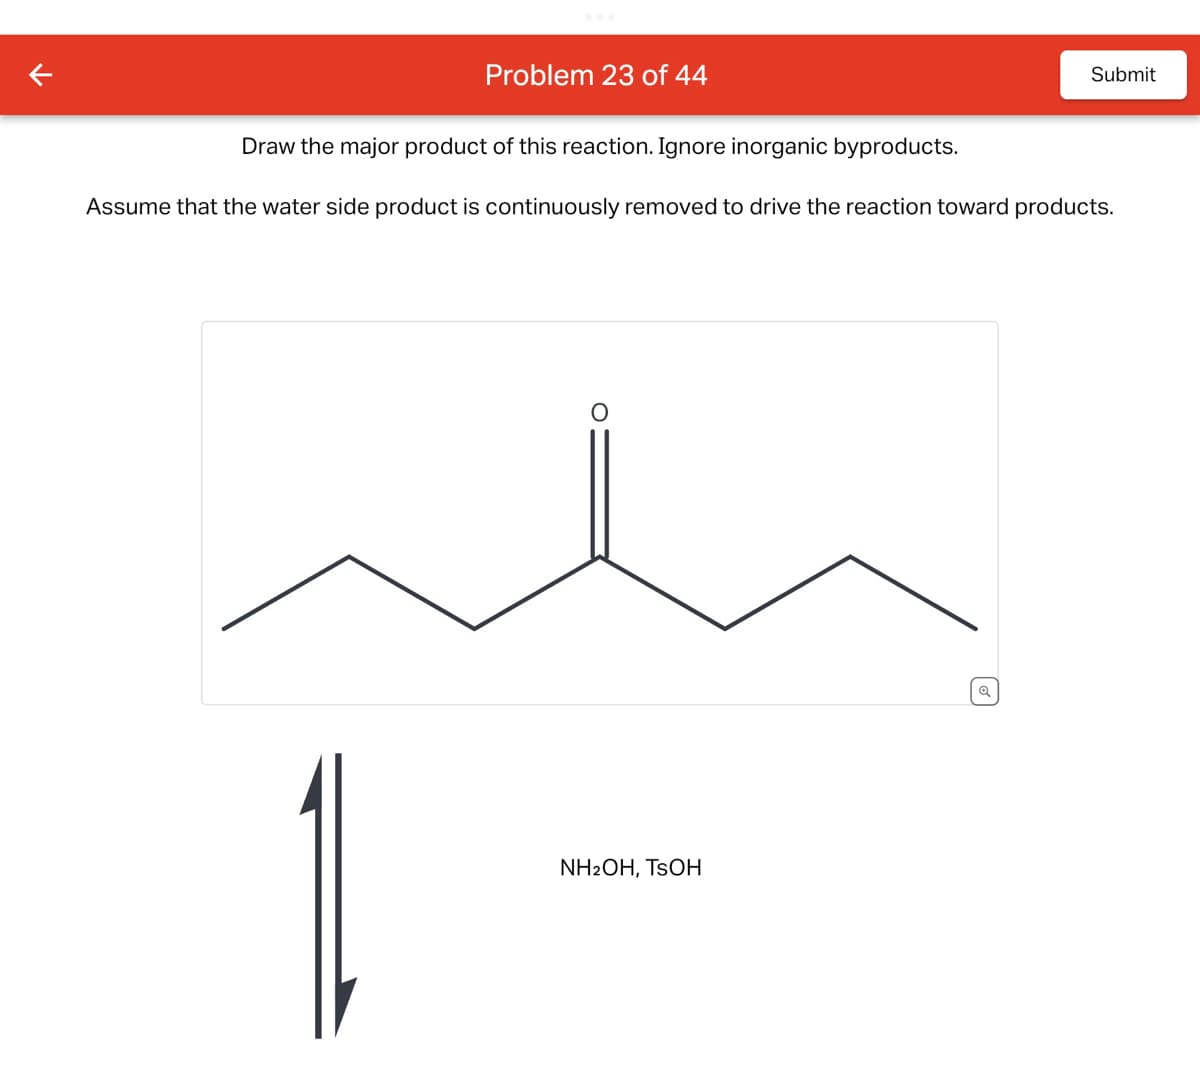 Problem 23 of 44
Submit
Draw the major product of this reaction. Ignore inorganic byproducts.
Assume that the water side product is continuously removed to drive the reaction toward products.
NH2OH, TSOH